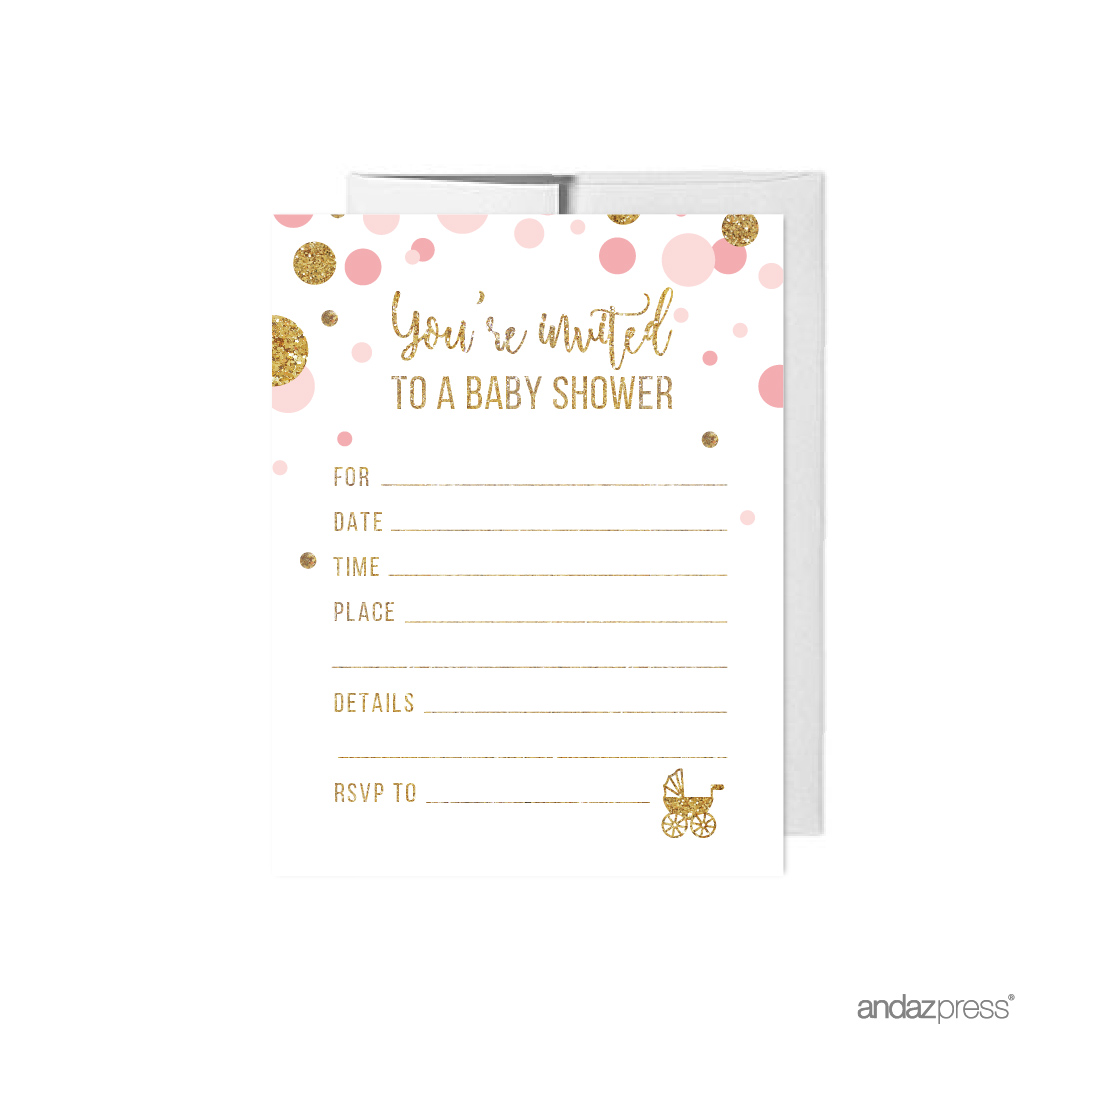 Blush Pink Gold Glitter Baby Shower Blank Invitations with Envelopes, 20ct